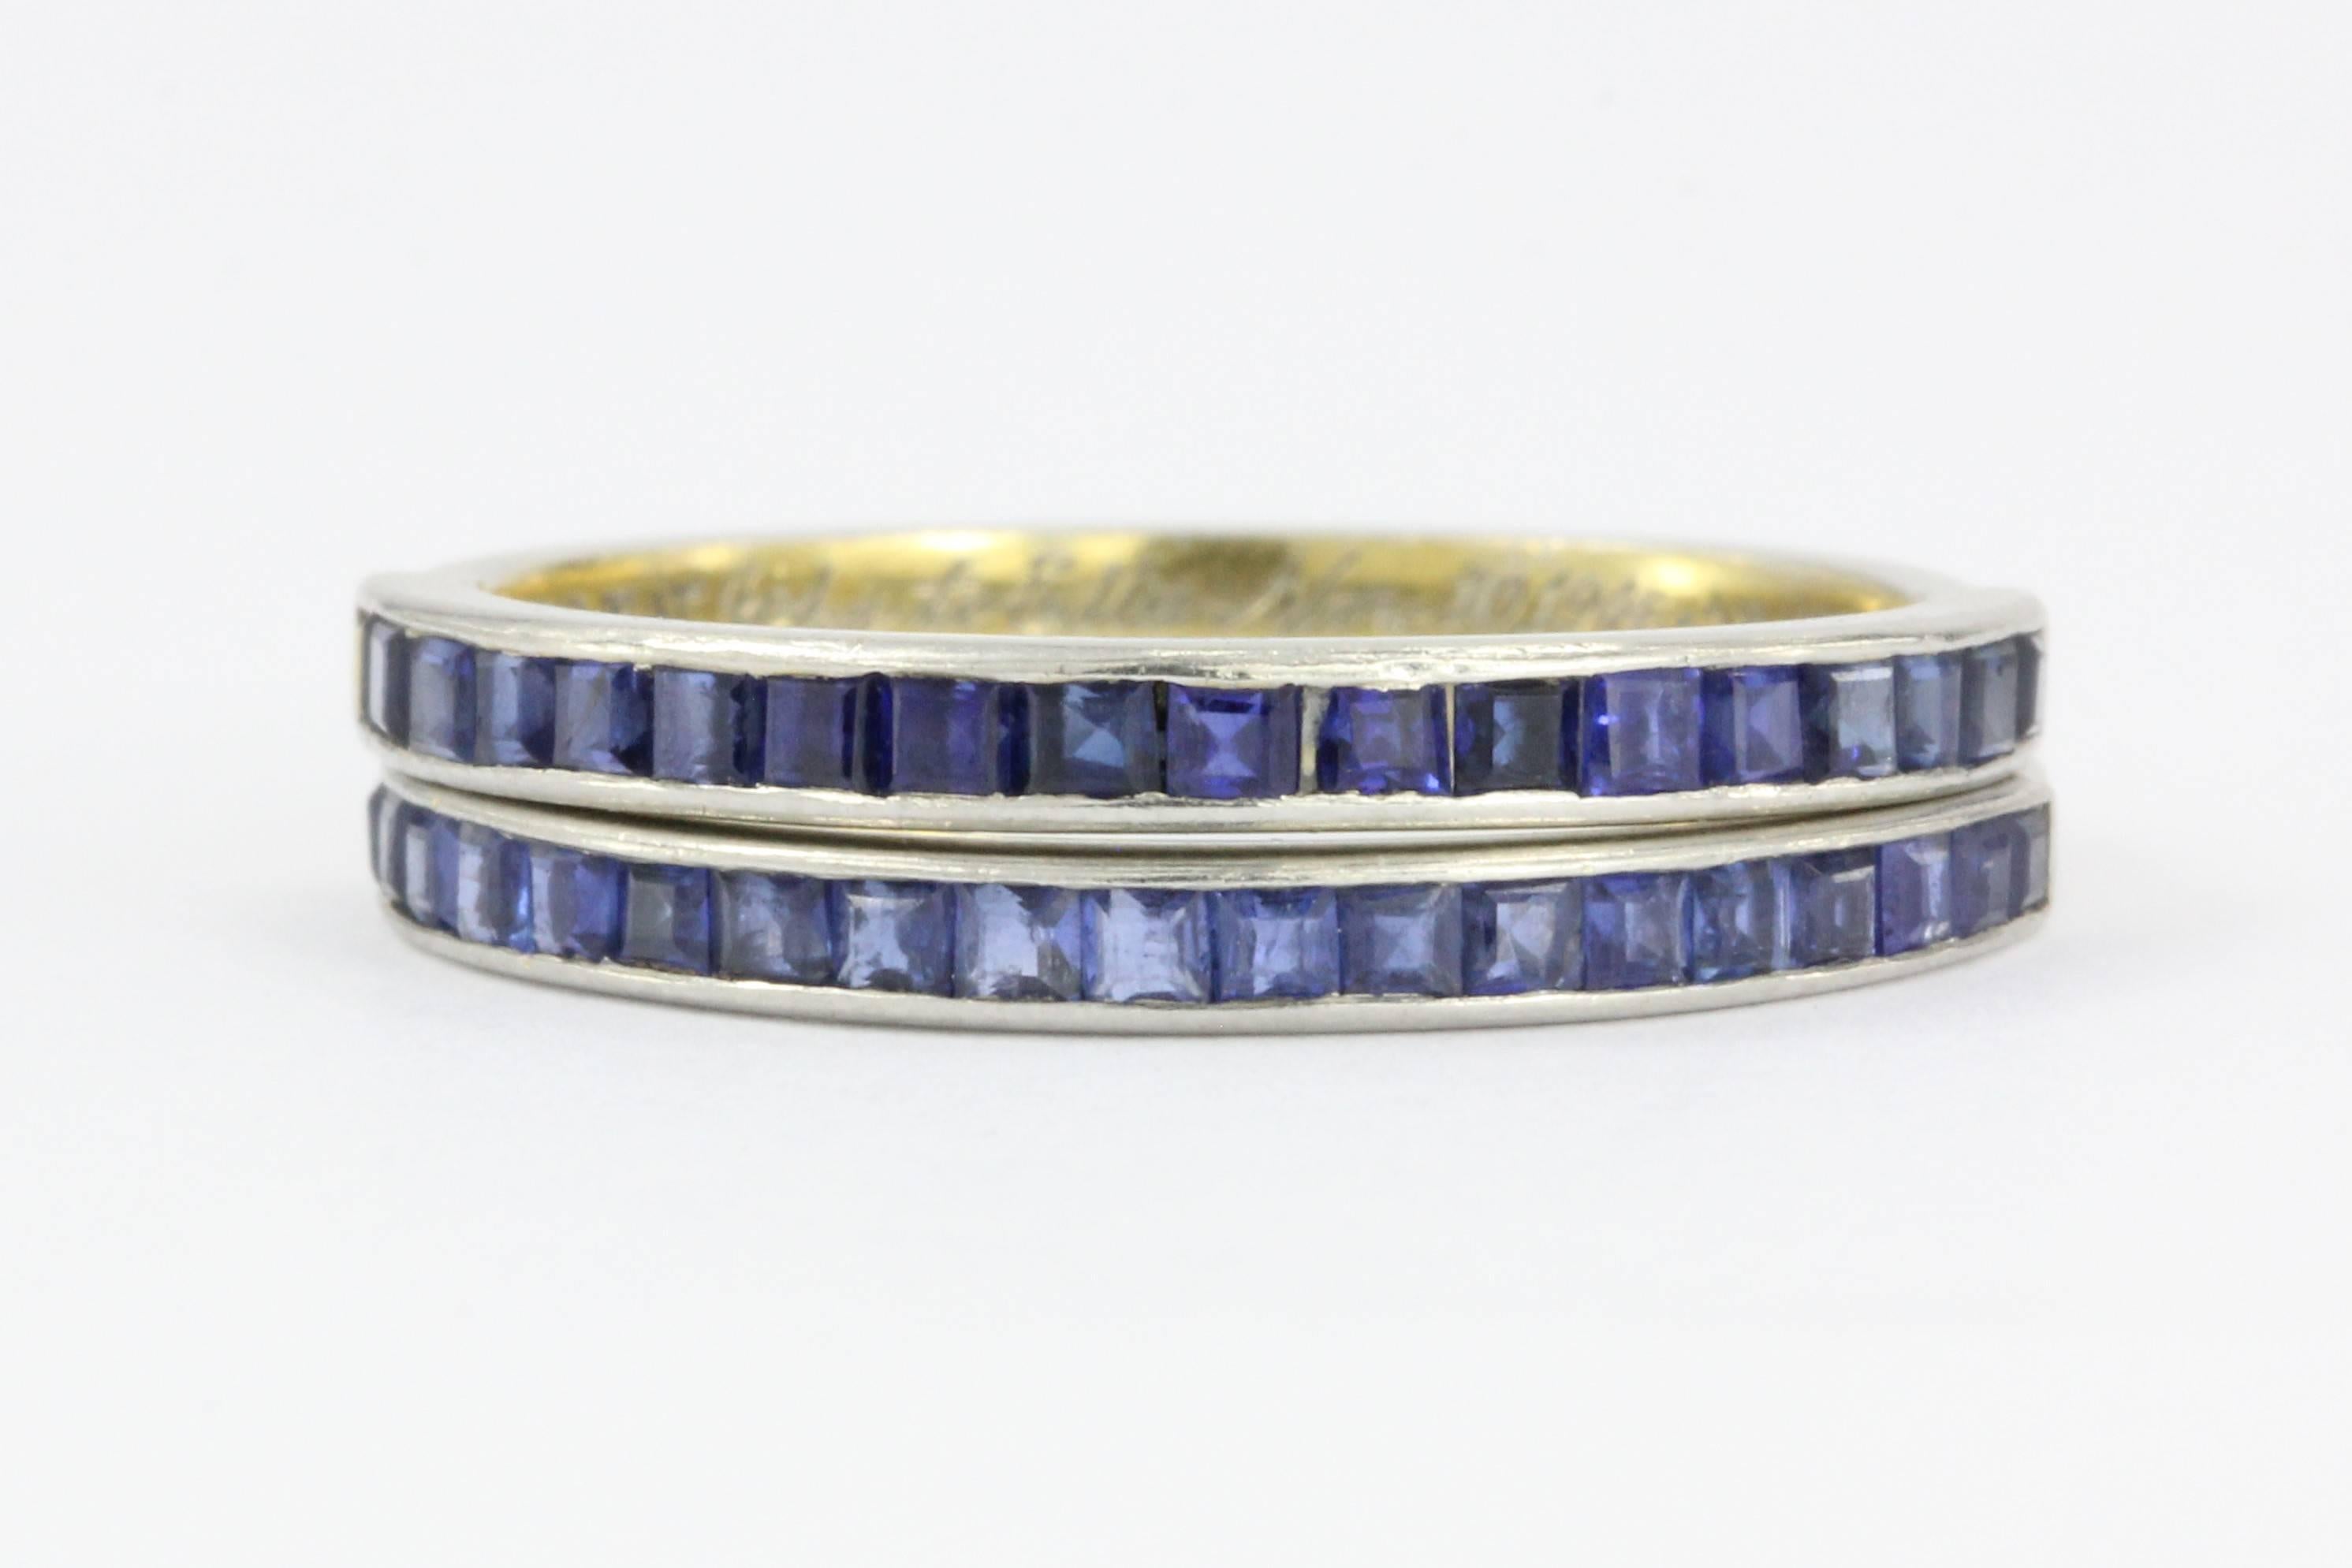 Tiffany & Co Platinum Sapphire Half Eternity Band Rings Pair c.1945

Fantastic  & Charming Love Tested Post WWII Survivors. These rings are in fantastic condition and ready to wear. They are both signed Tiffany & Co Irid.Plat. and